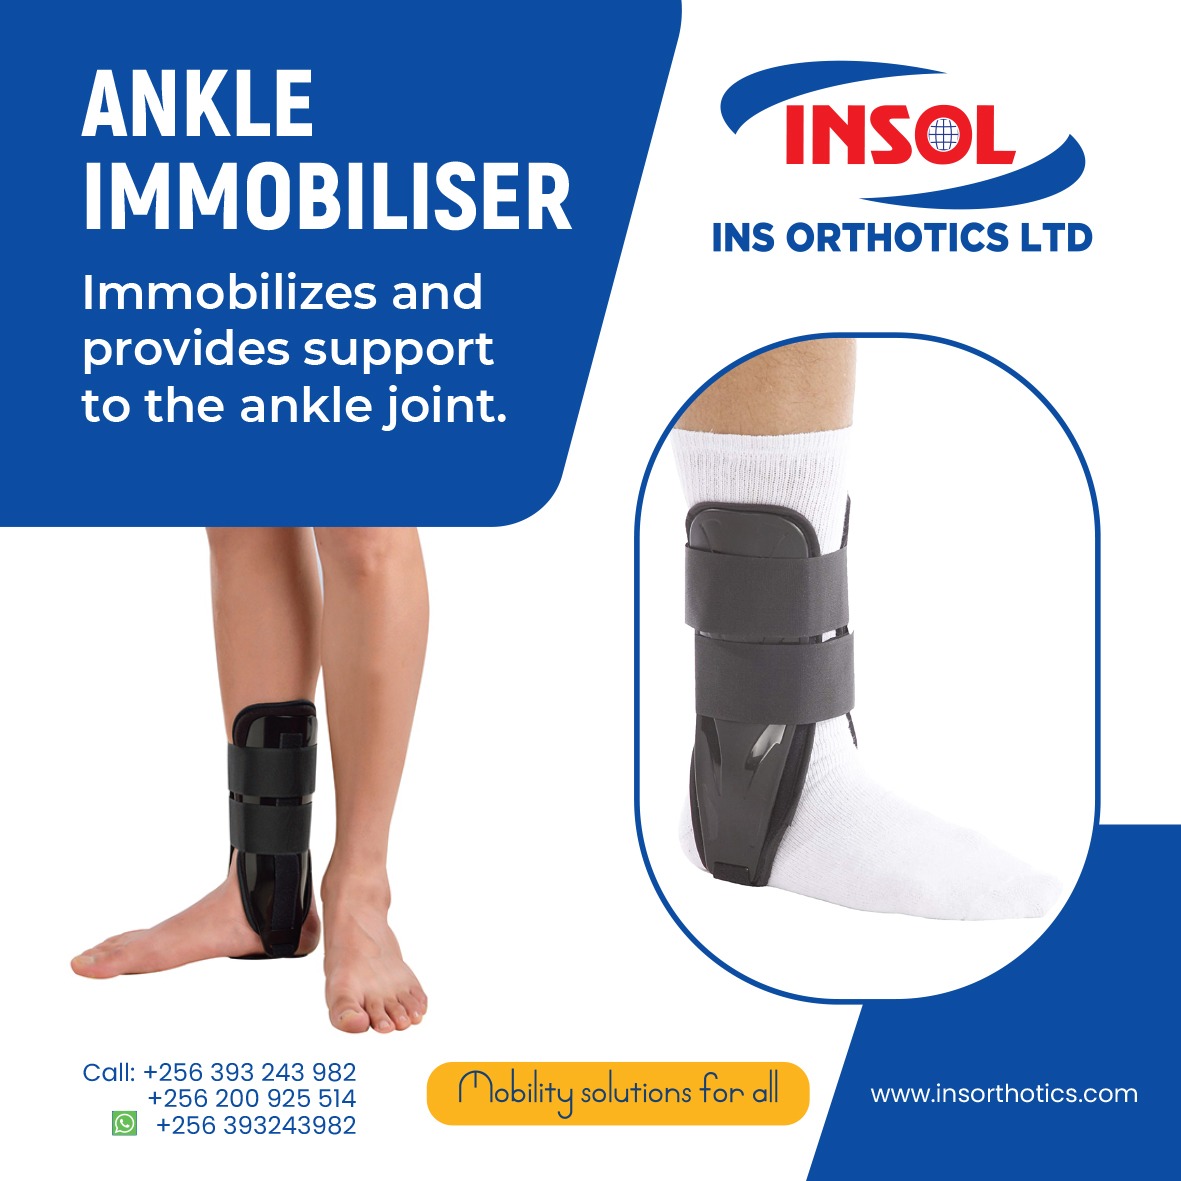 An ankle immobilizer restricts movement and provides support to the ankle joint for ankle injuries such as sprains, strains, fractures, or after ankle surgery.
The immobilizer limits motion in the ankle while allowing the person to walk or bear weight on the affected leg.